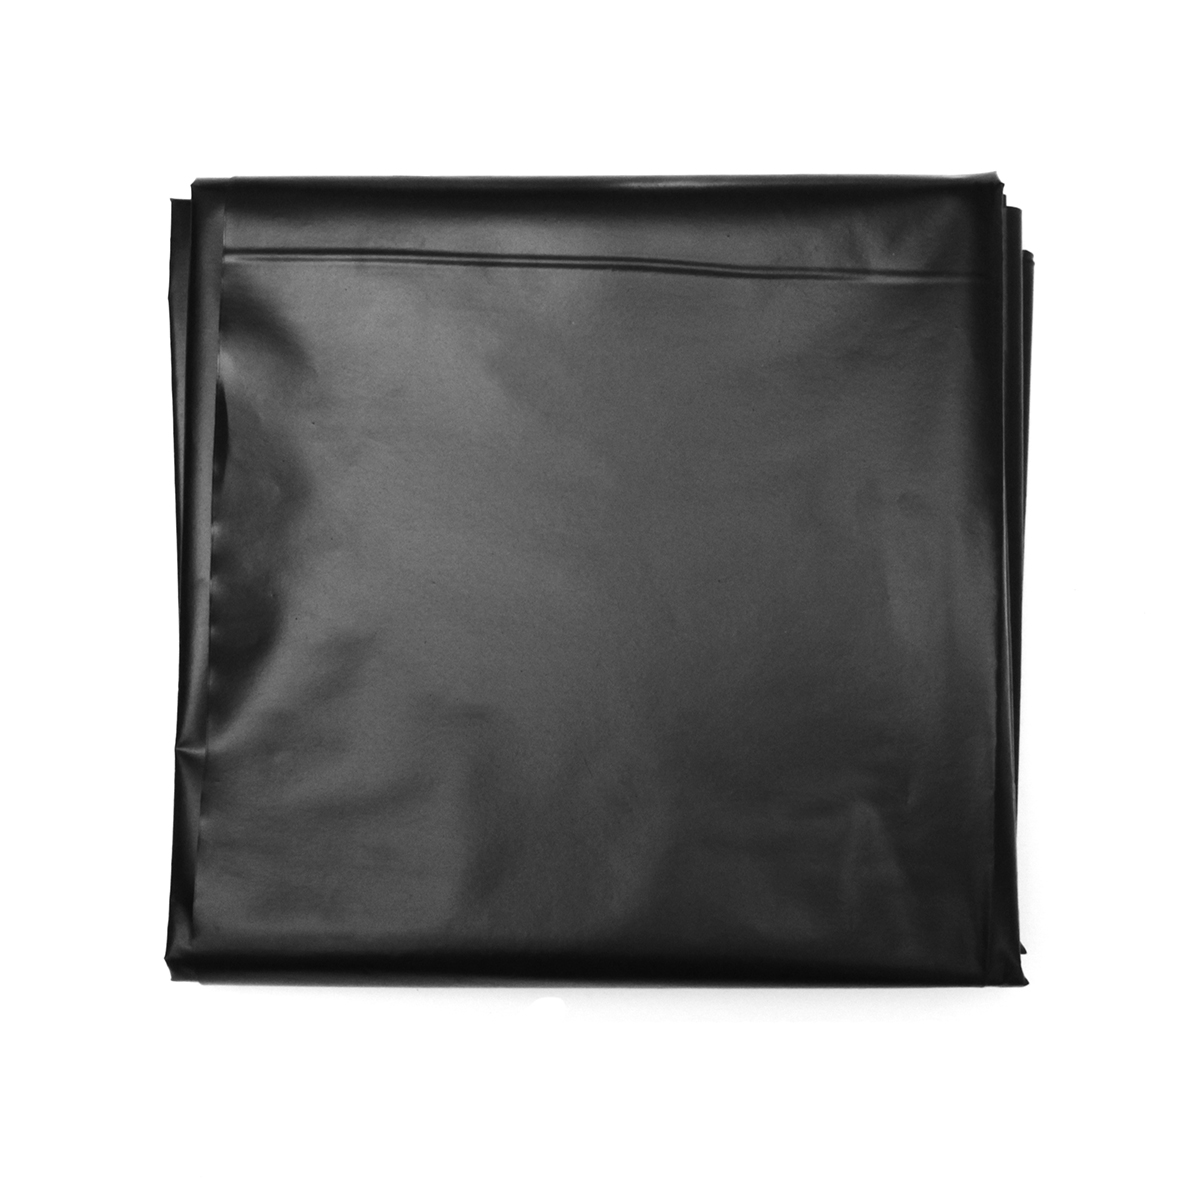 Find 5x10ft Fish Pool Pond Liner Membrane Culture Film For Composite Geomembrane Sewage Treatment Anti seepage Geomembrane for Sale on Gipsybee.com with cryptocurrencies